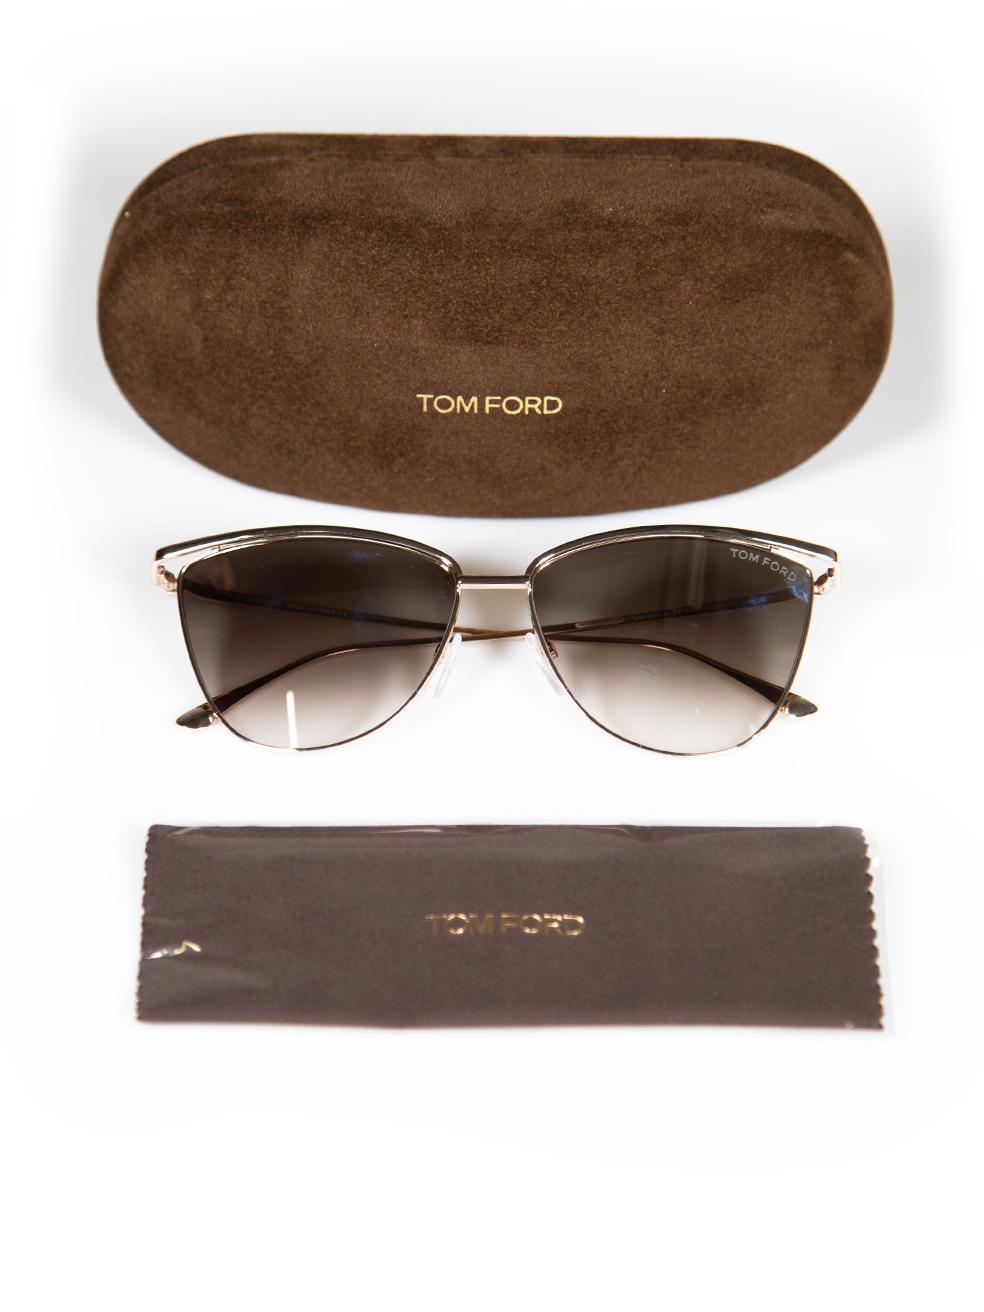 Tom Ford Shiny Rose Gold Veronica Sunglasses For Sale 4